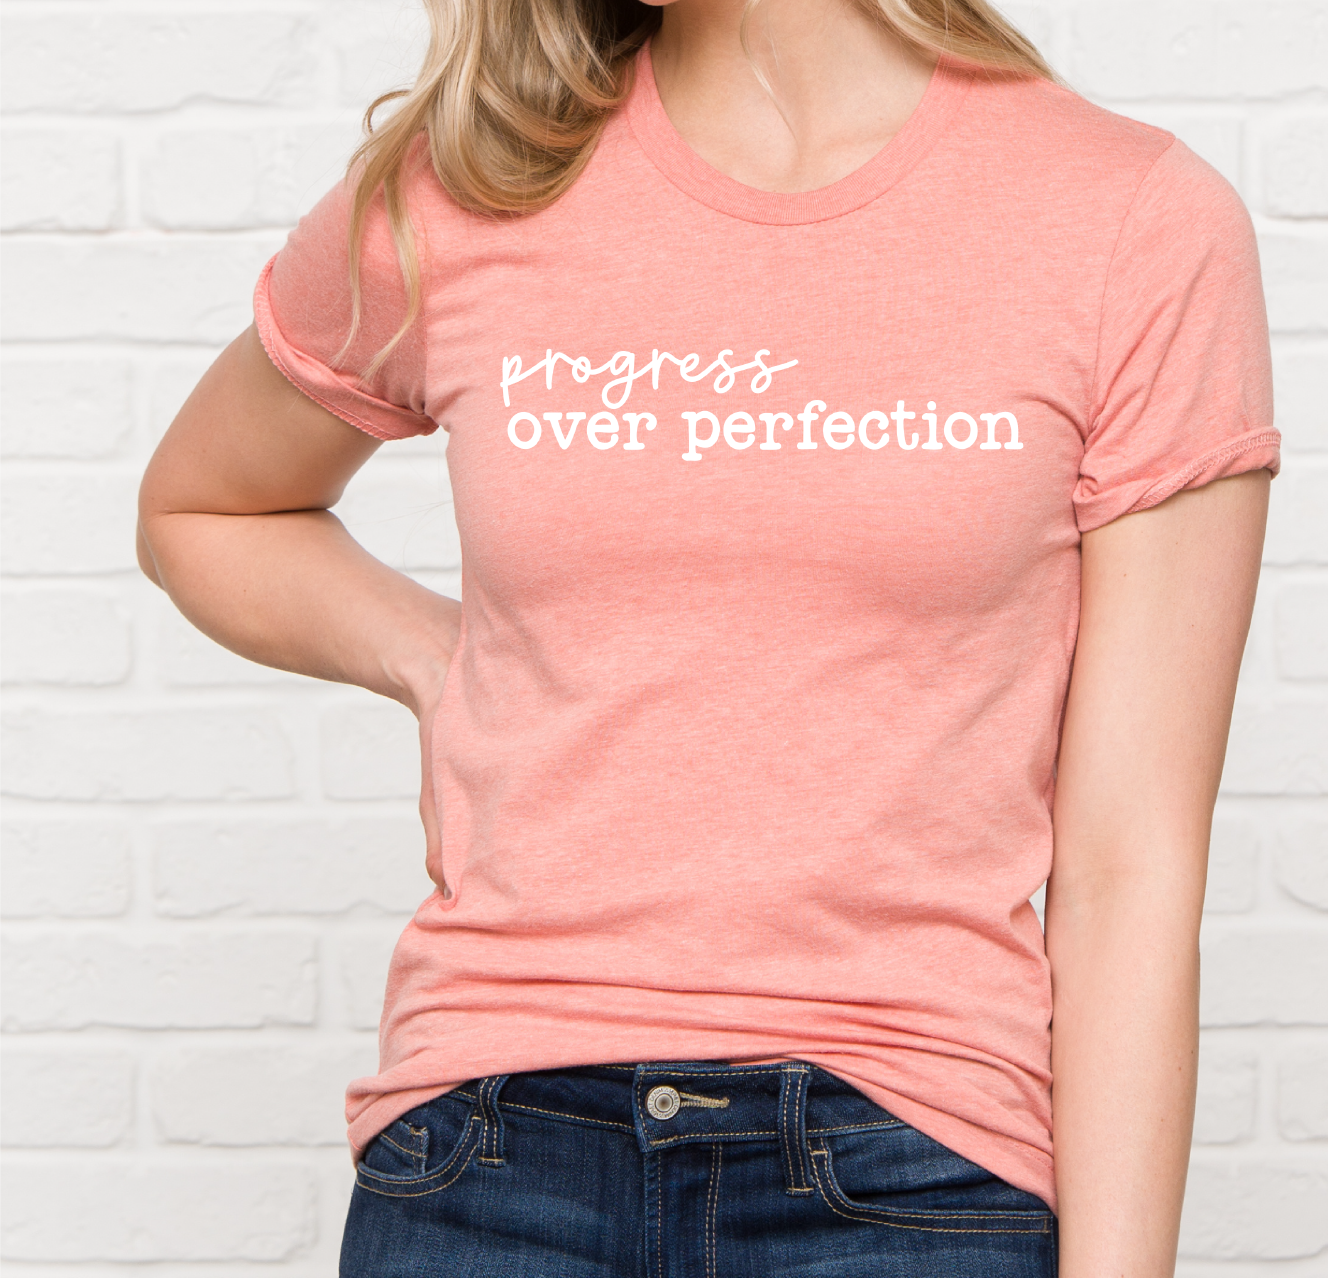 Progess Over Perfection TShirt . Women's Workout Tees